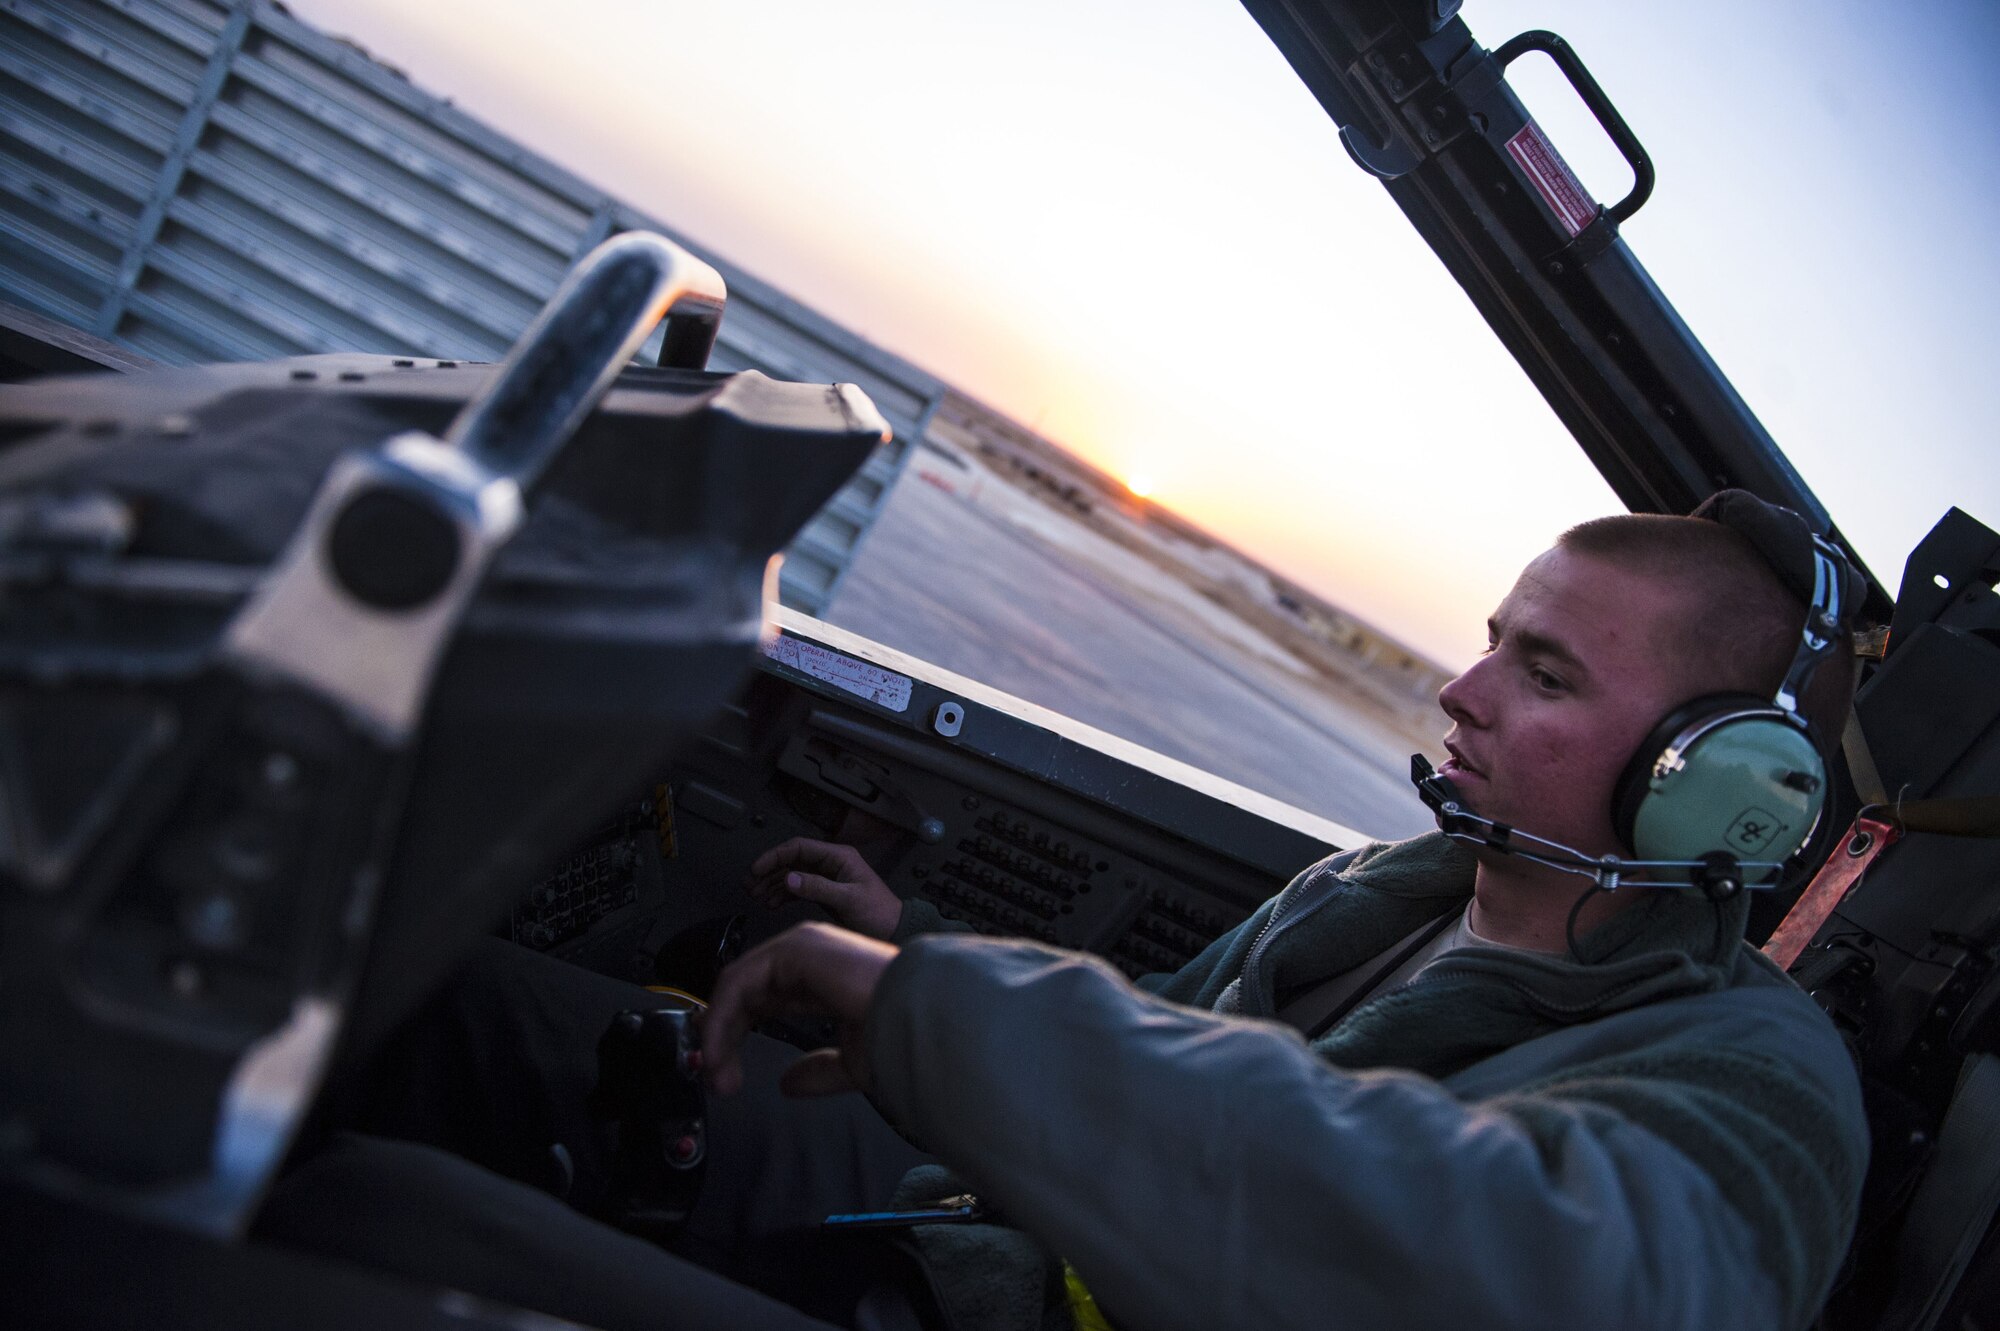 Airman 1st Class Logan Webb, assigned to the 332d Expeditionary Maintenance Squadron, performs avionics checks on an F-15E Strike Eagle November 10, 2017 in Southwest Asia. 332d Air Expeditionary Wing aircraft maintainers were recently awarded the 2017 Clements McMullen Memorial Daedalian Weapons System Maintenance Trophy in recognition of their historic impact on the air campaign against ISIS. (U.S. Air Force photo by Staff Sgt. Joshua Kleinholz)